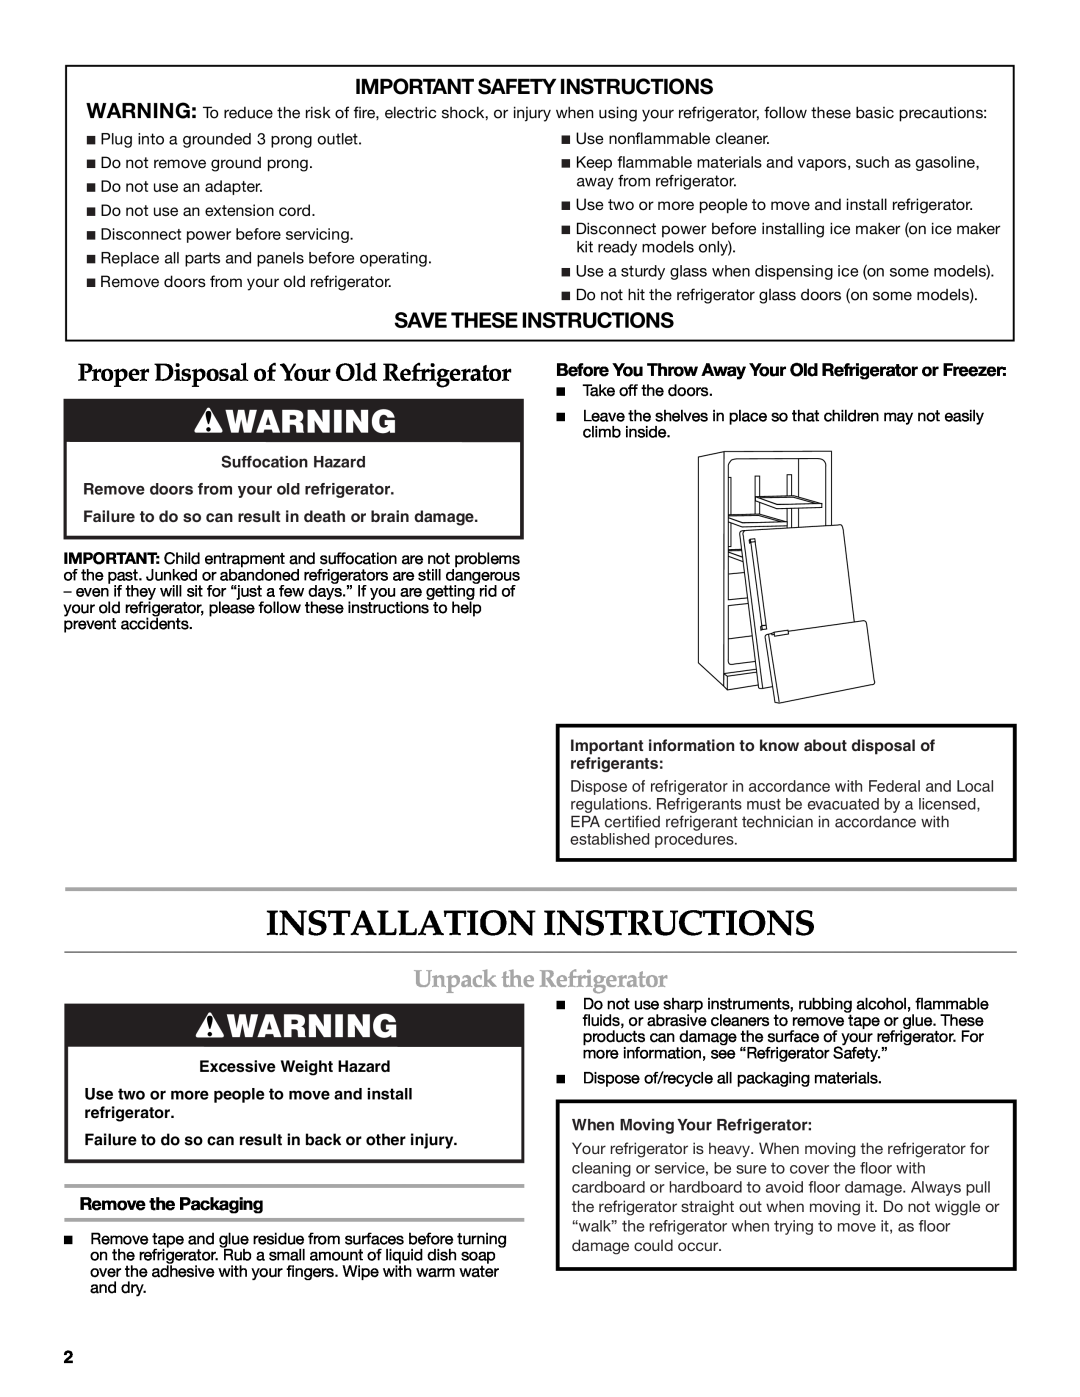 Heartland HCBMR19 Proper Disposal of Your Old Refrigerator, Important Safety Instructions, Save These Instructions 